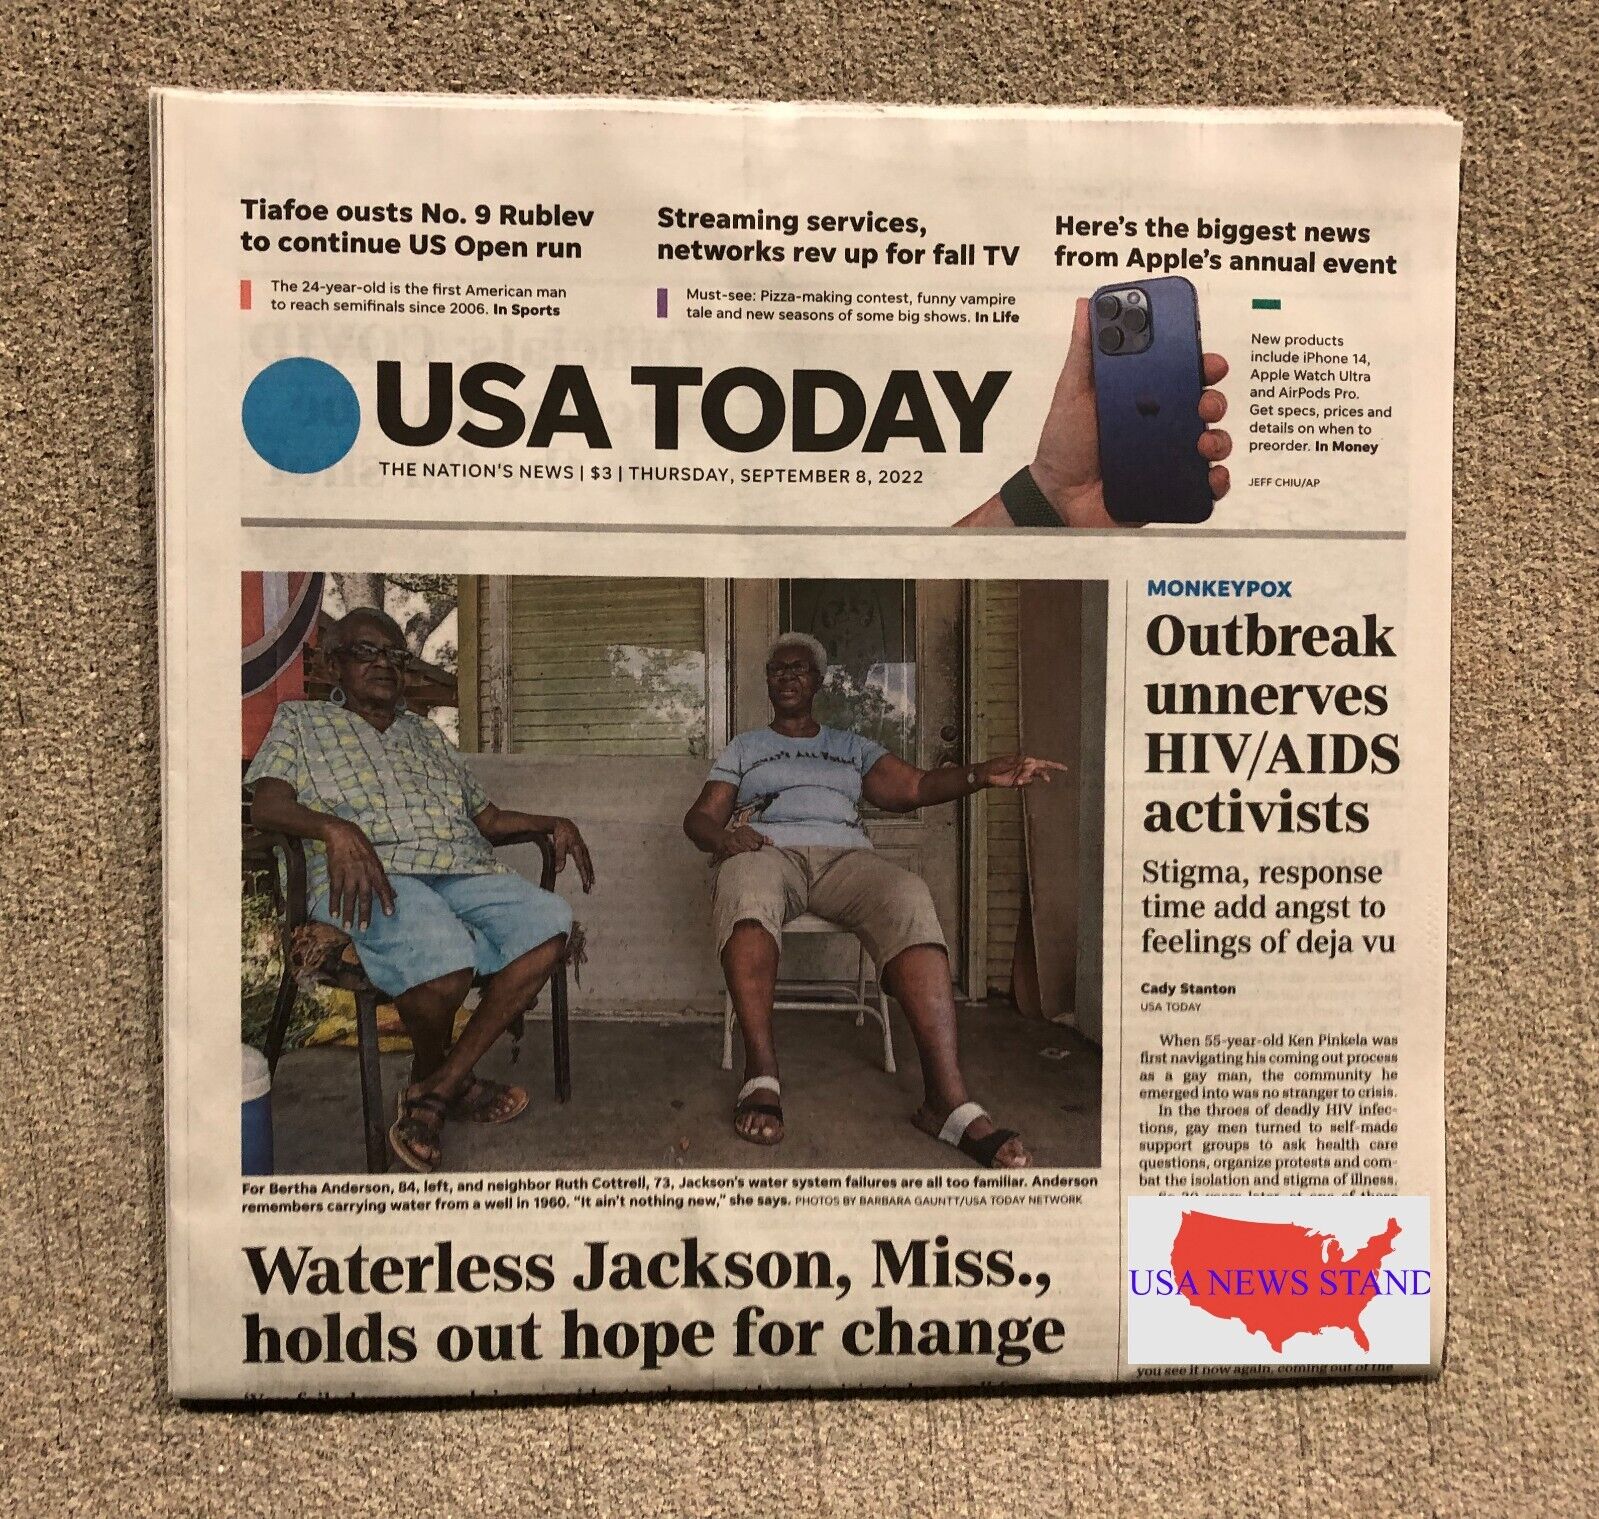 THE USA TODAY - THURSDAY SEPTEMBER 8, 2022 (APPLE IPHONE 14 - HIV/AIDS OUTBREAK)